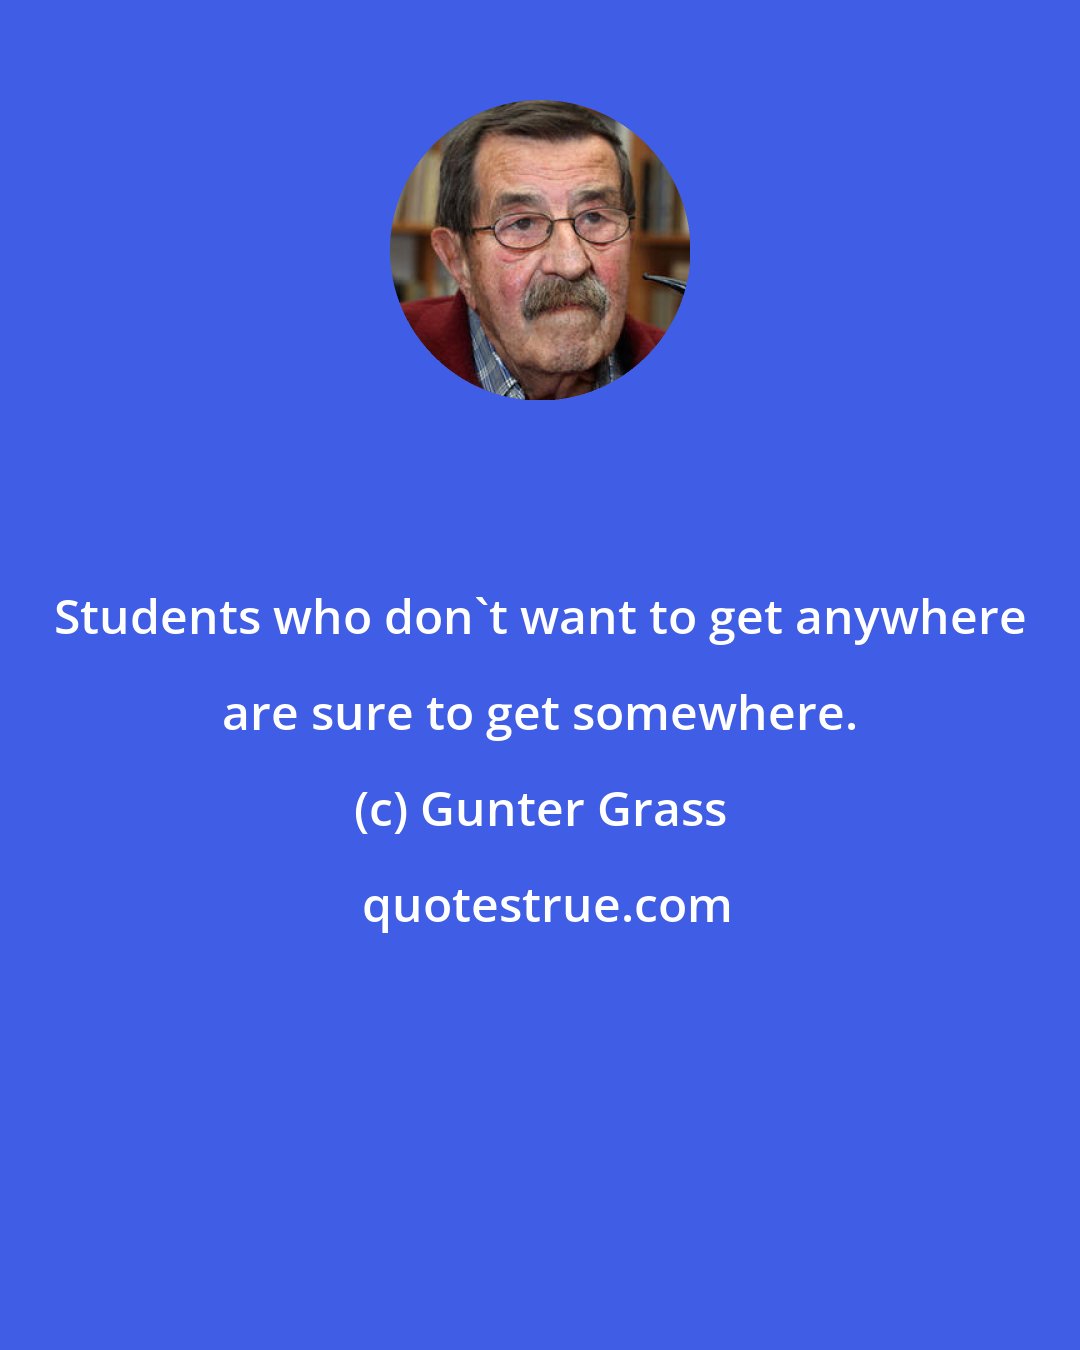 Gunter Grass: Students who don't want to get anywhere are sure to get somewhere.